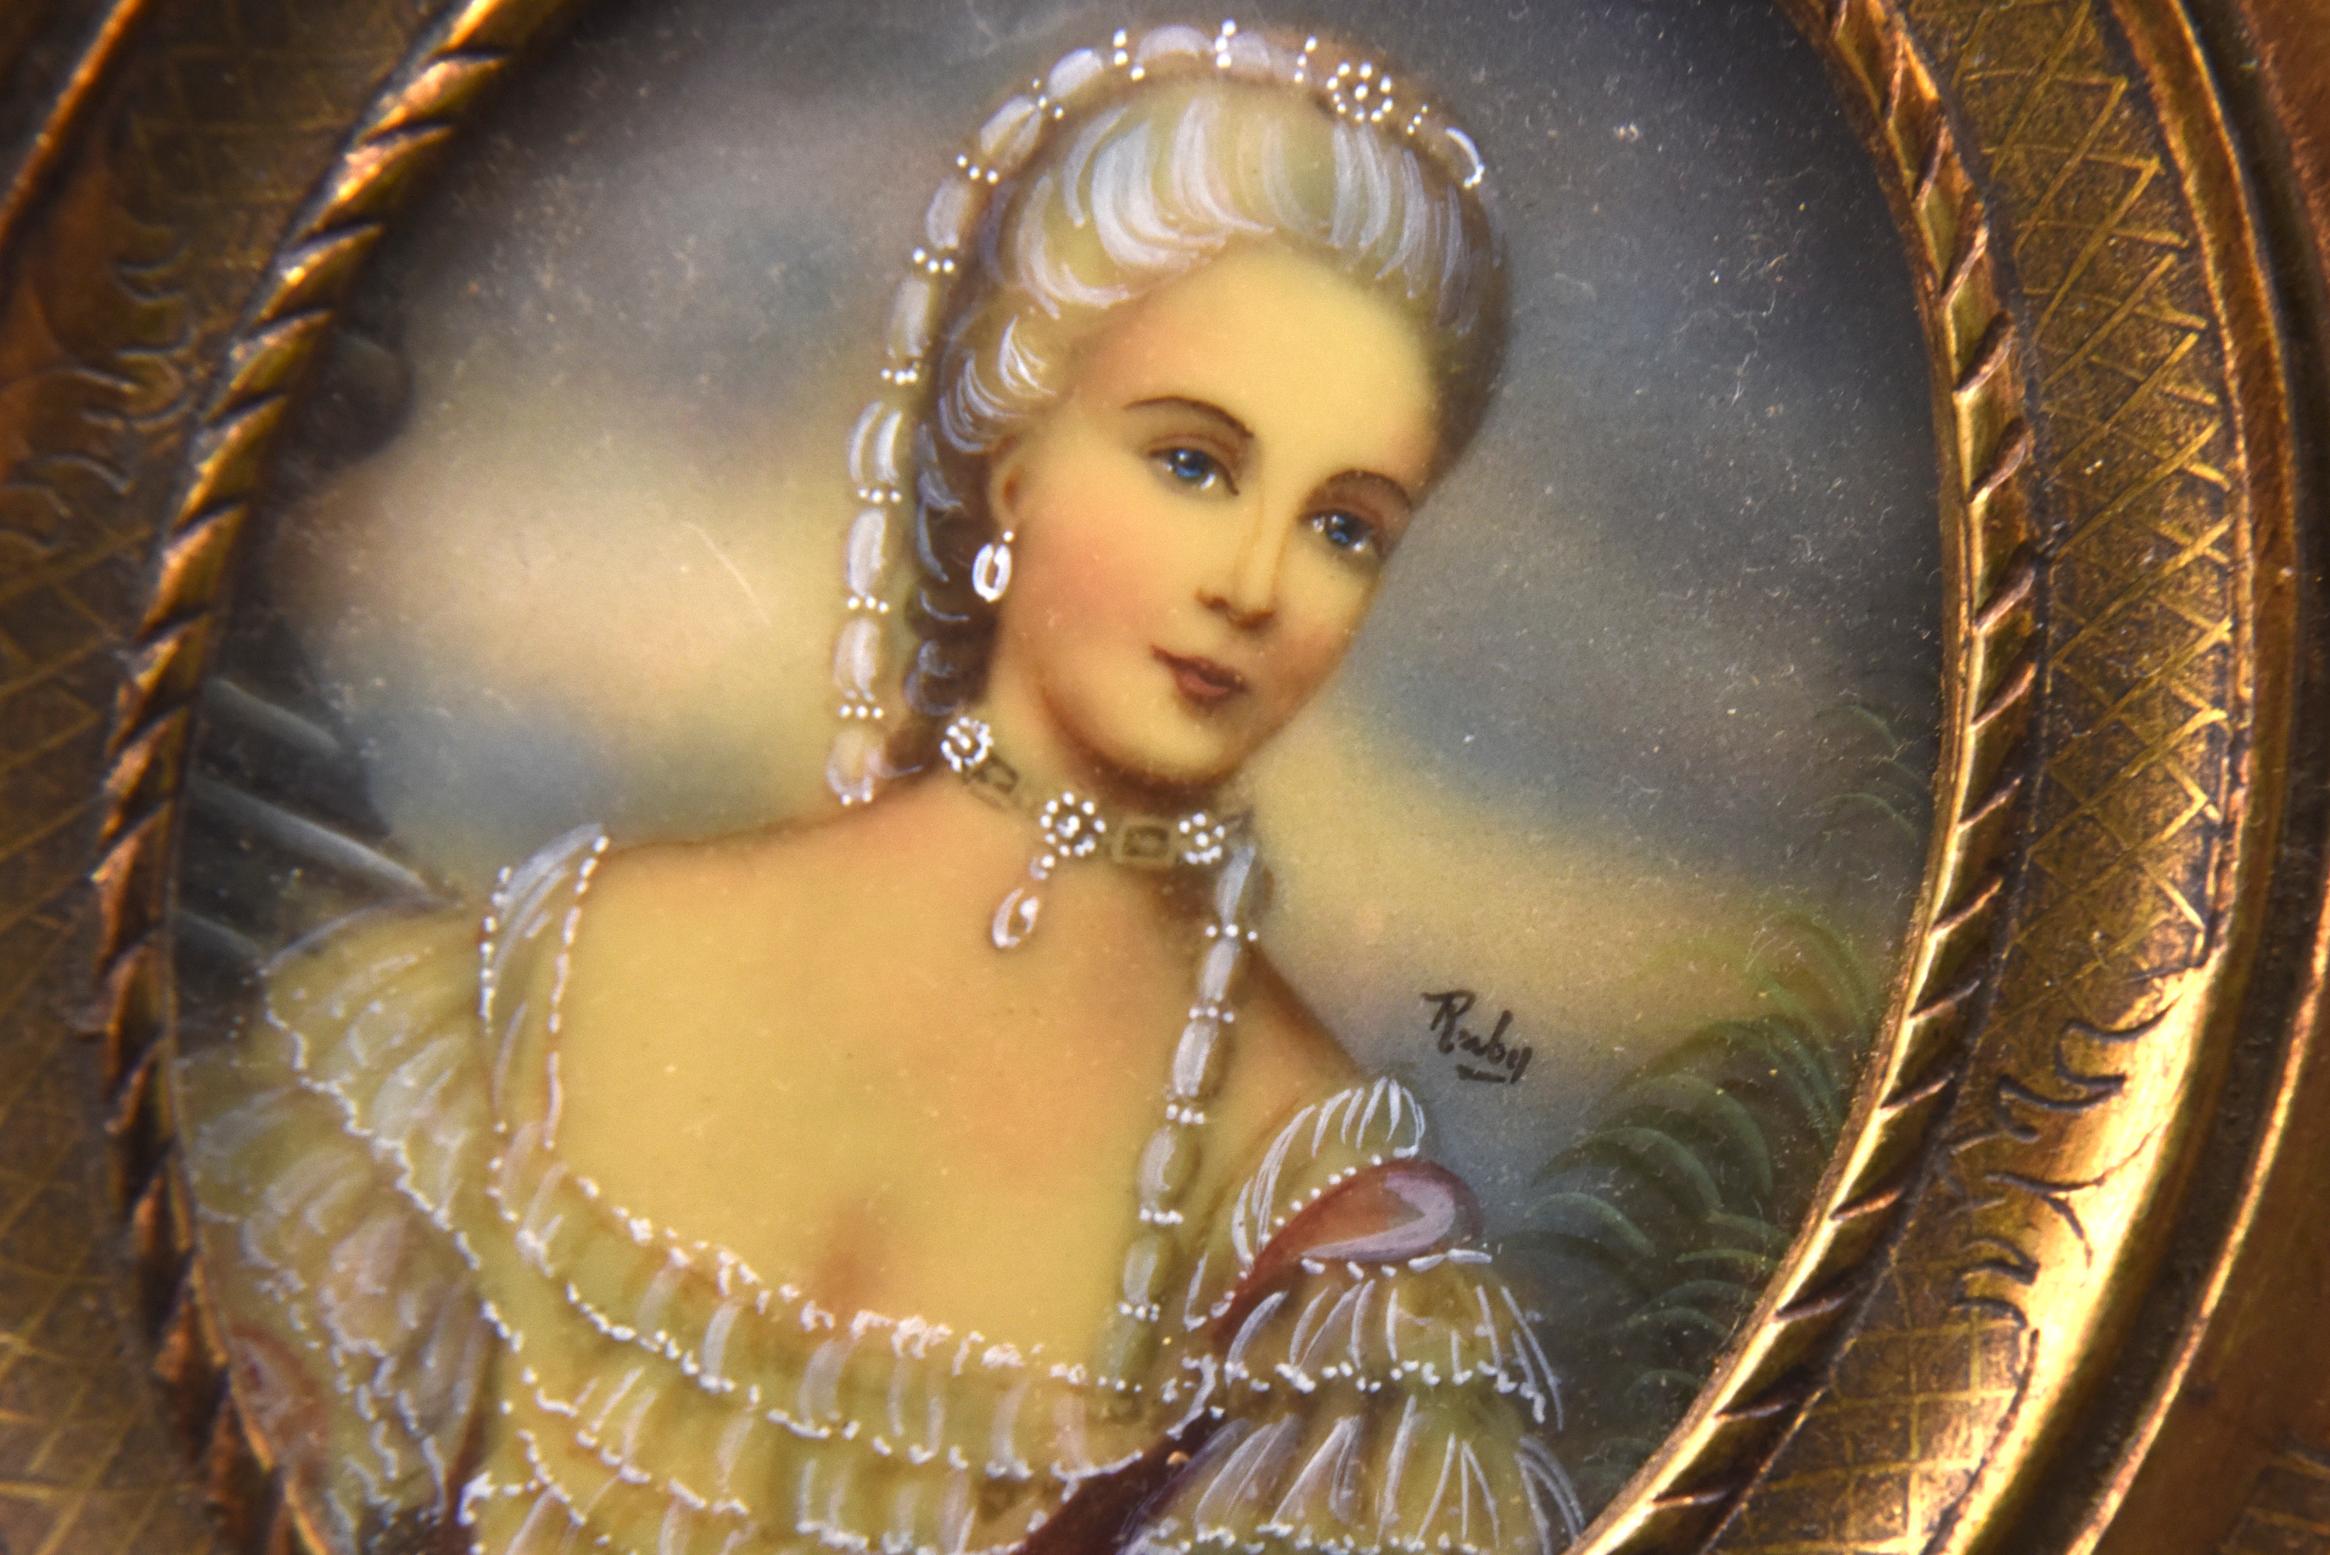 Miniature Lady Portrait by Ruby Hand Painted on Celluloid in Giltwood Frame 1